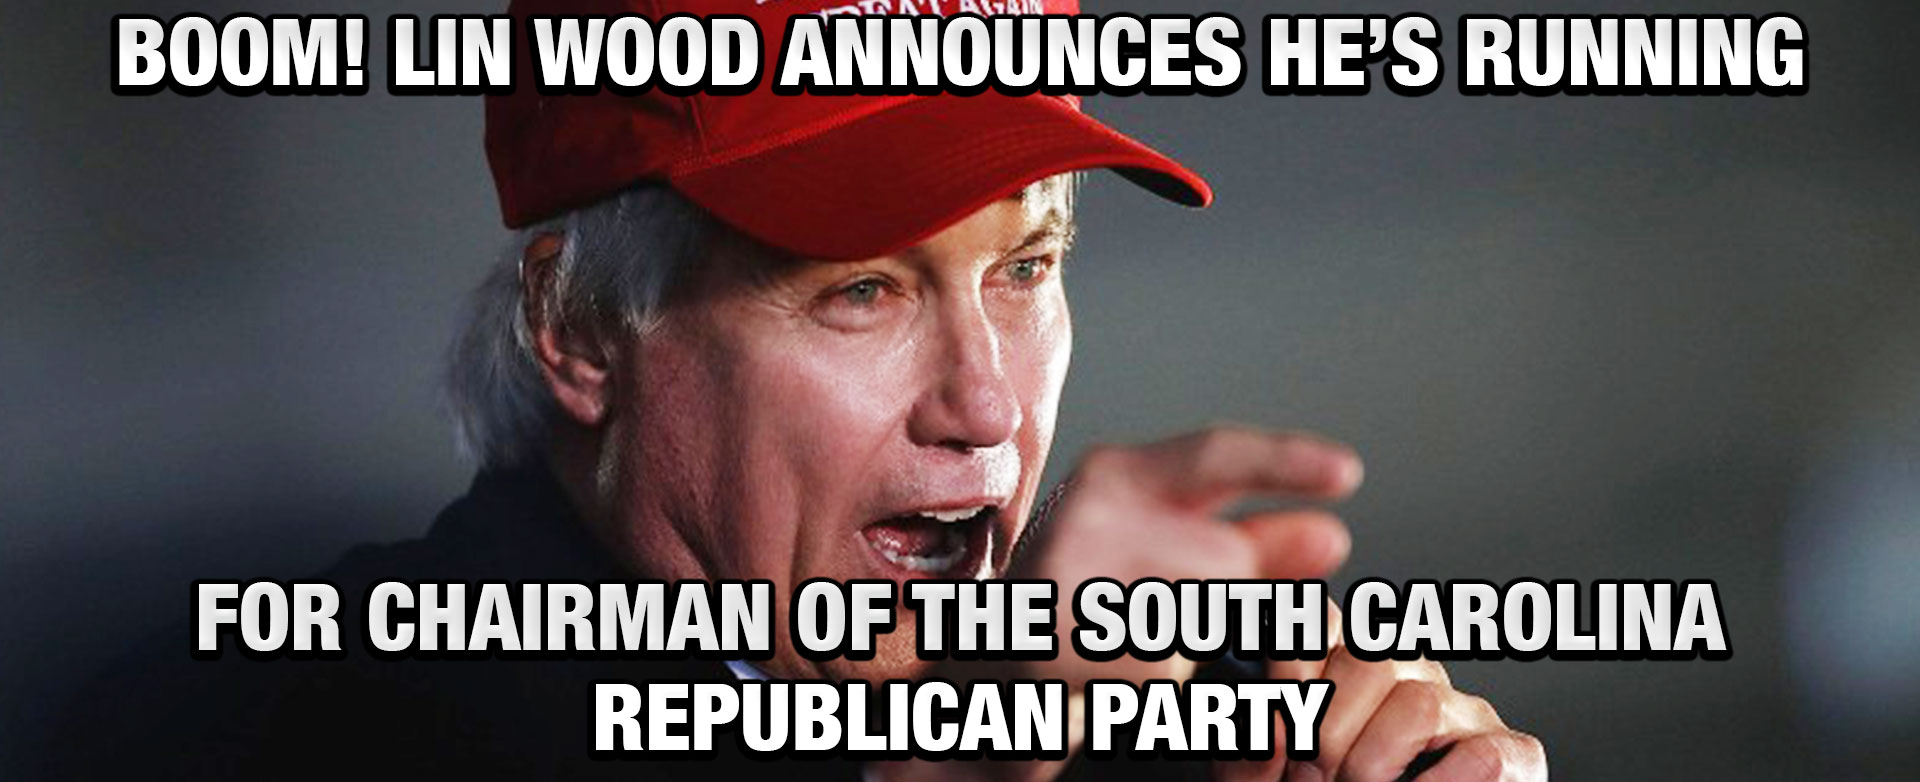 MyPatriotsNetwork-BOOM! Lin Wood Announces He’s Running For Chairman Of The South Carolina Republican Party